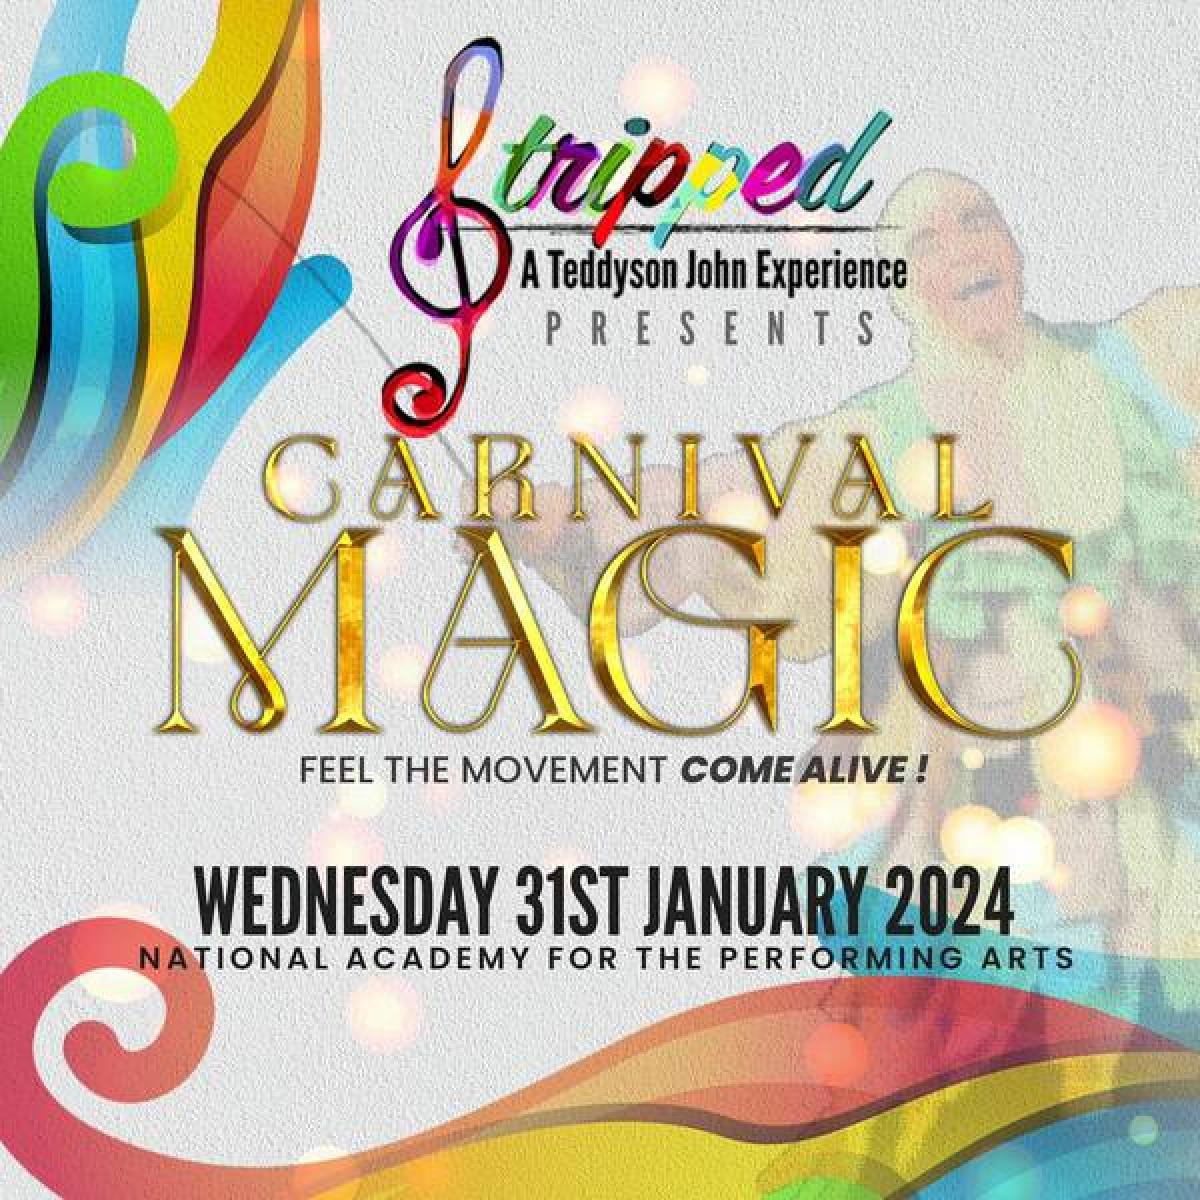 Stripped - Carnival Magic flyer or graphic.